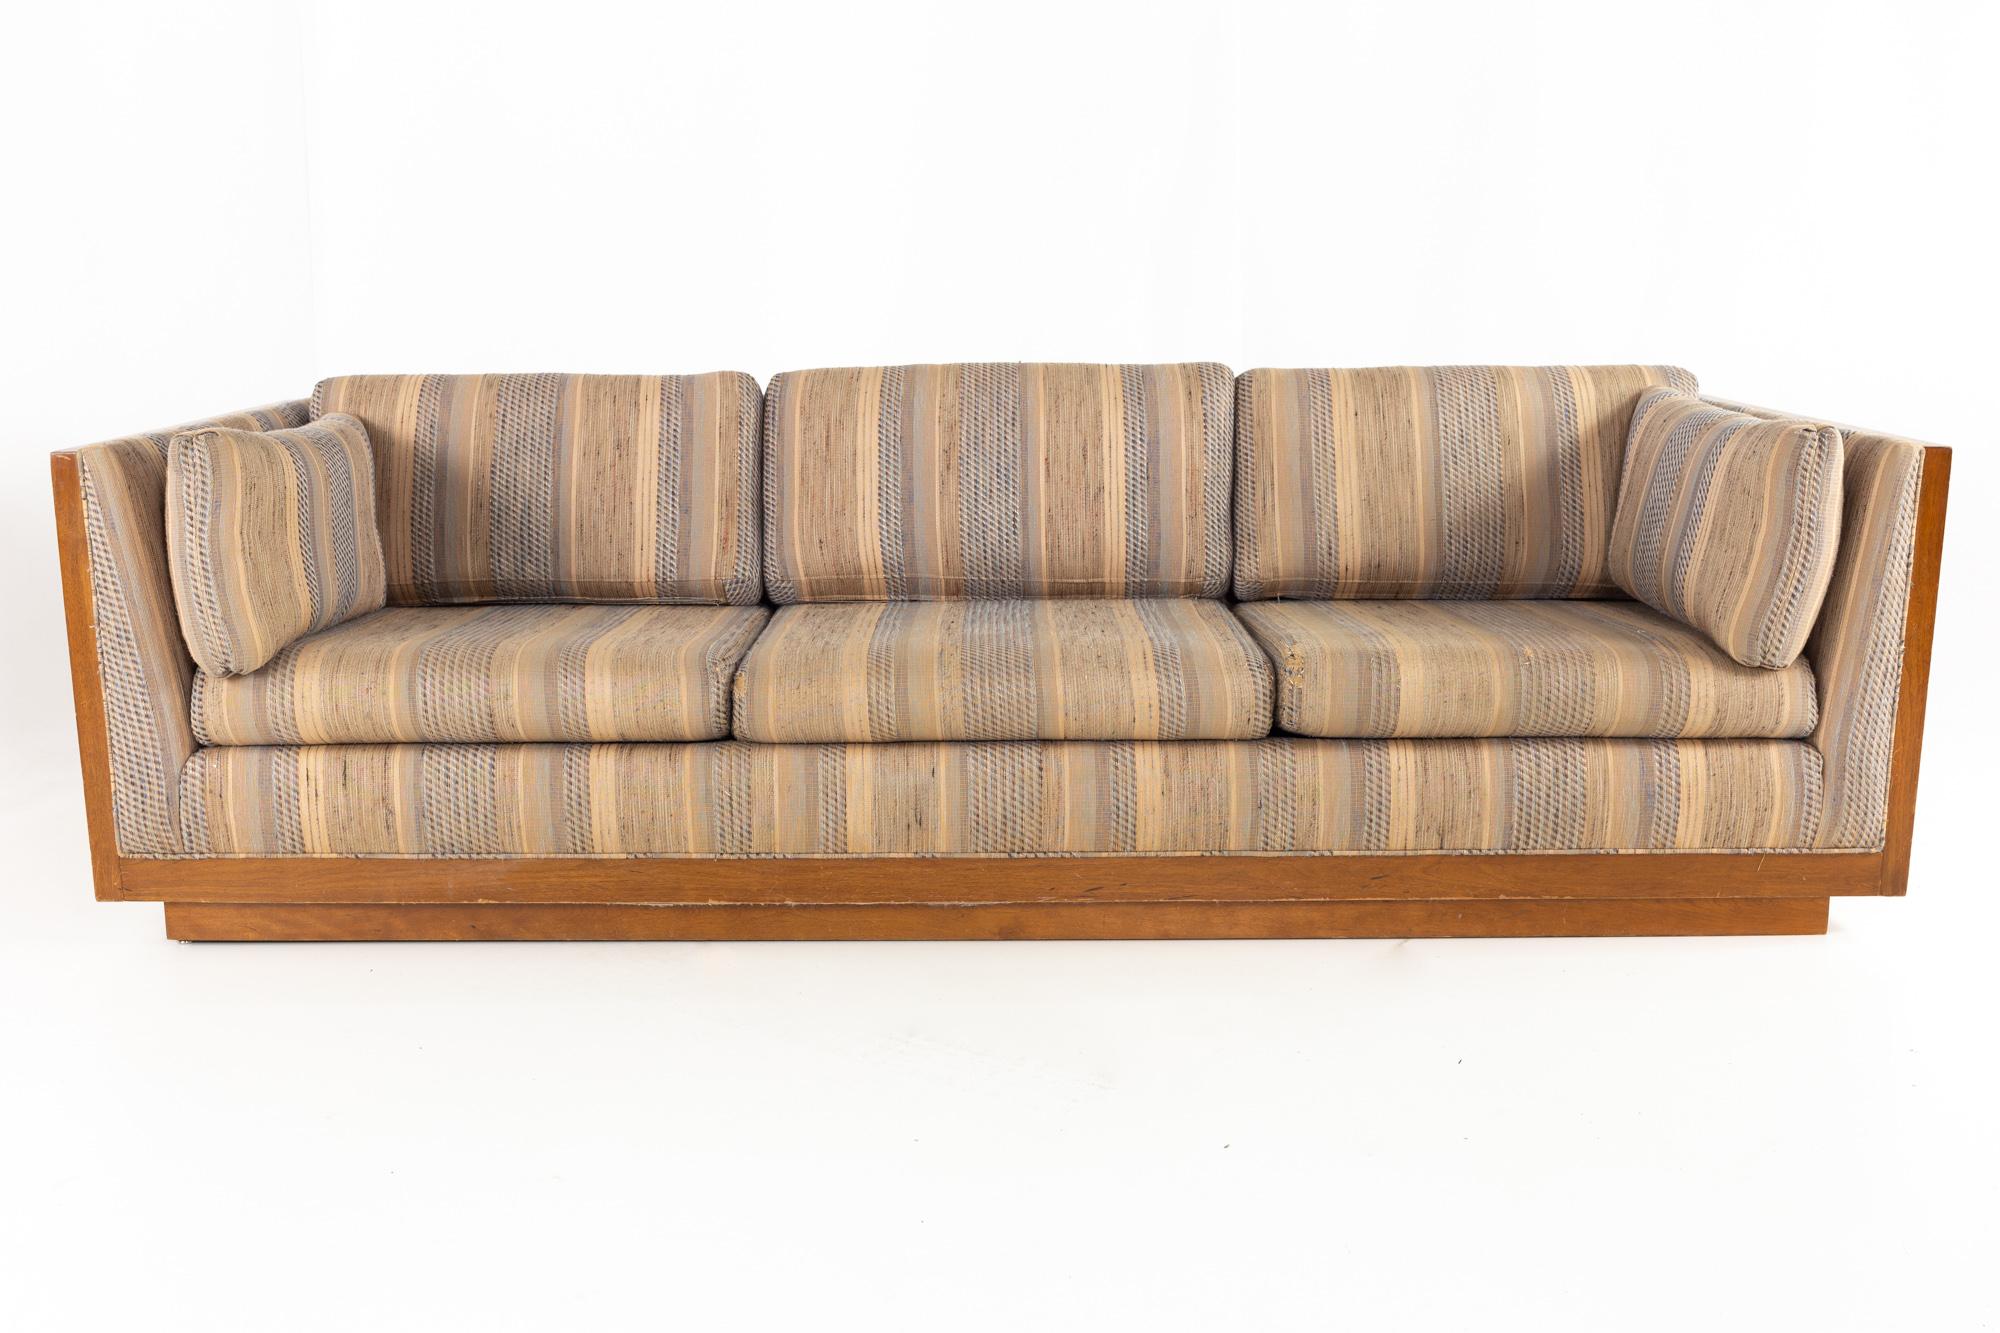 Milo Baughman Style mid century walnut floating case sofa 

Sofa measures: 94 wide x 35 deep x 26.25 inches high

All pieces of furniture can be had in what we call restored vintage condition. That means the piece is restored upon purchase so